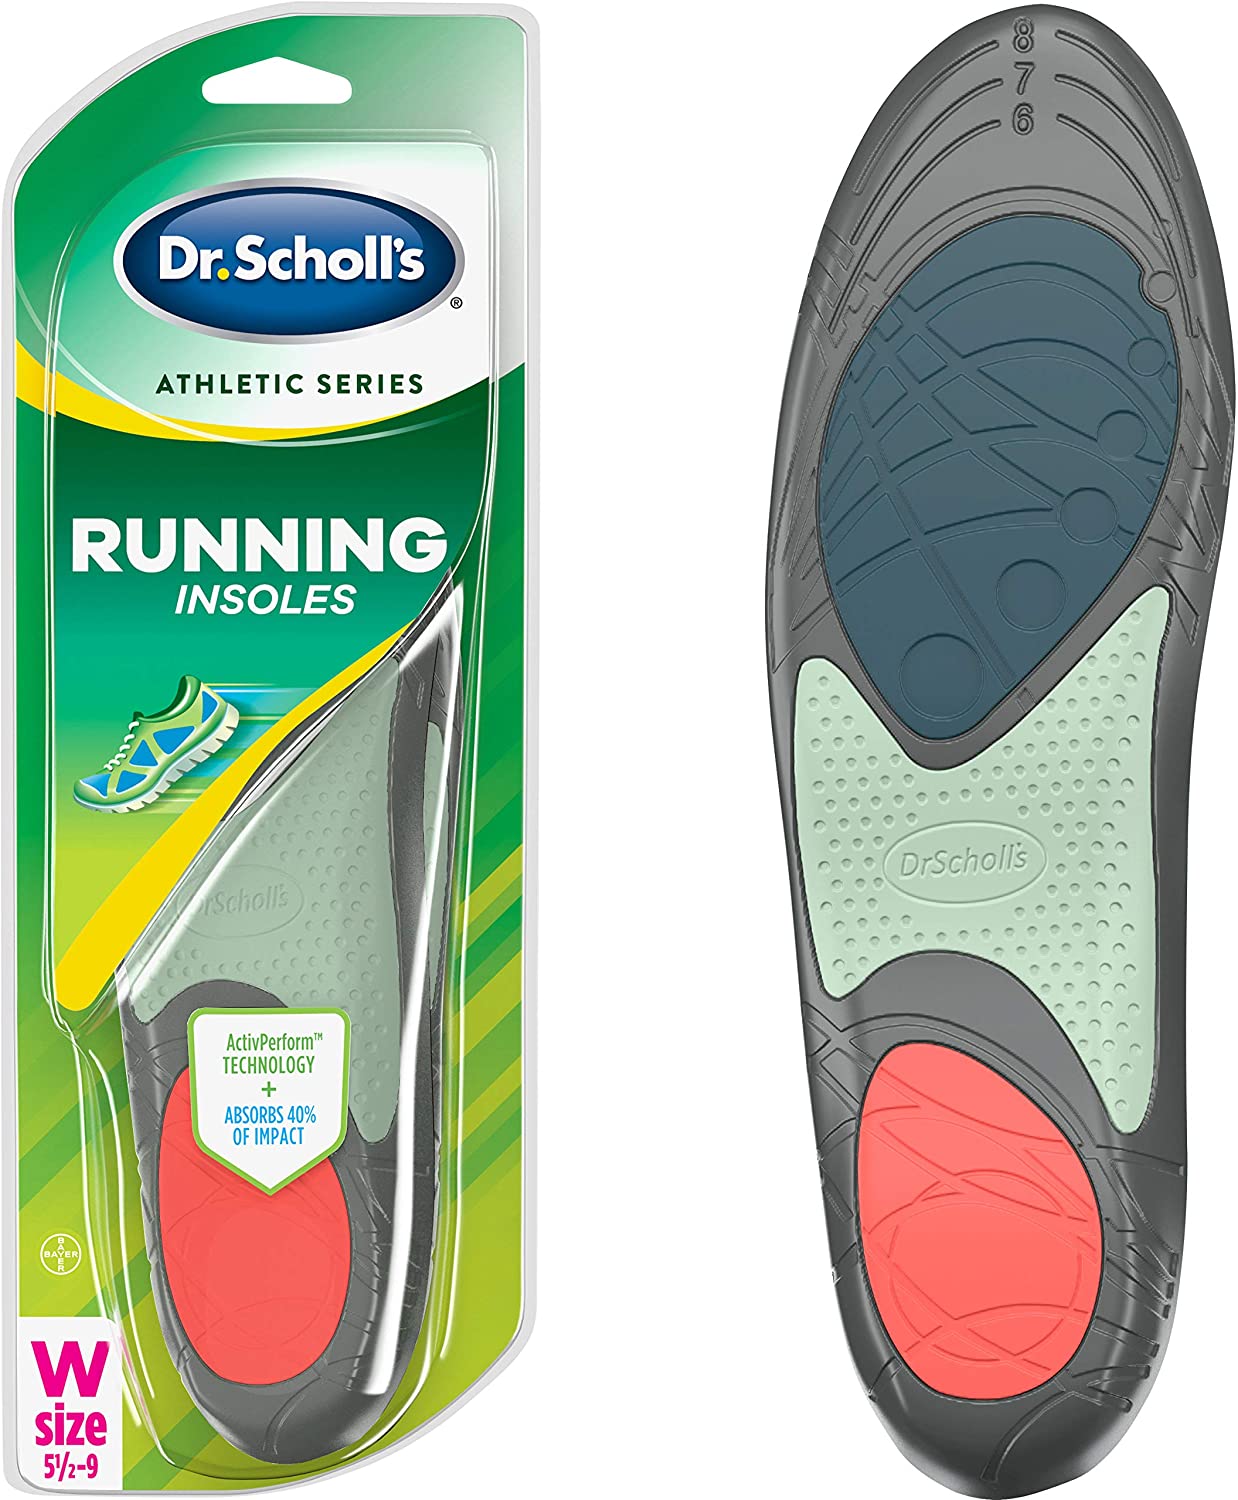 Dr. Scholl’s RUNNING Insoles